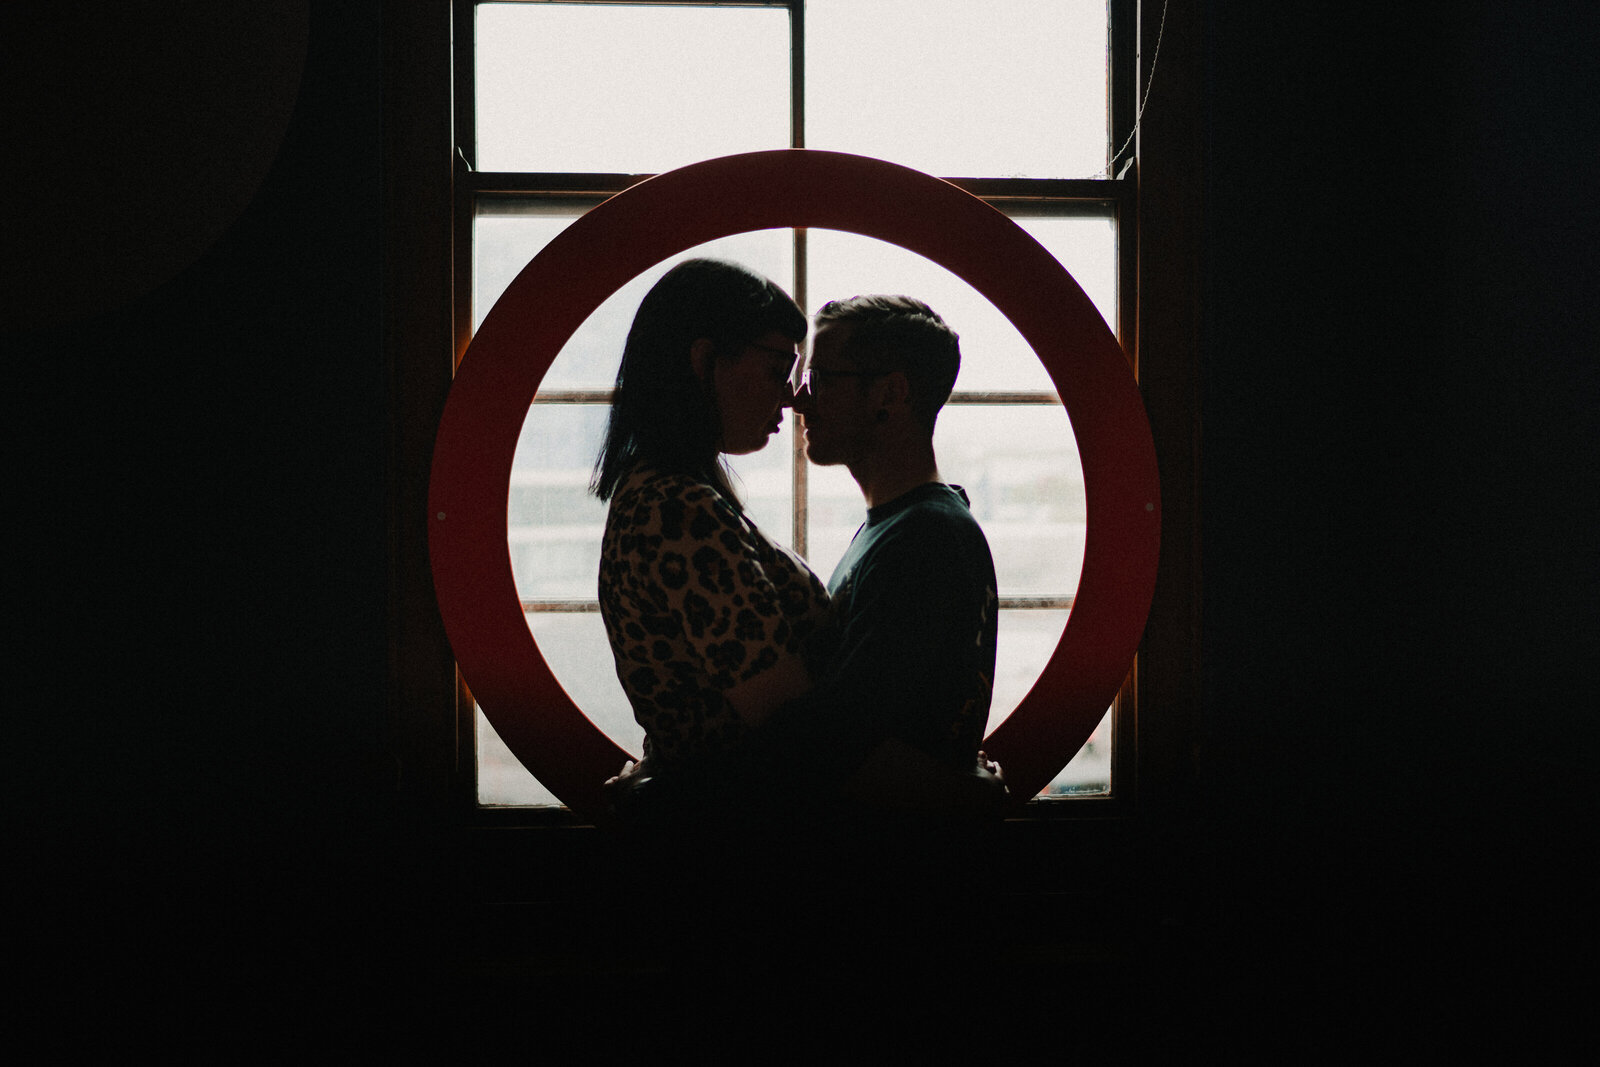 Silhouette shot of a couple against a window. Creative alternative photography